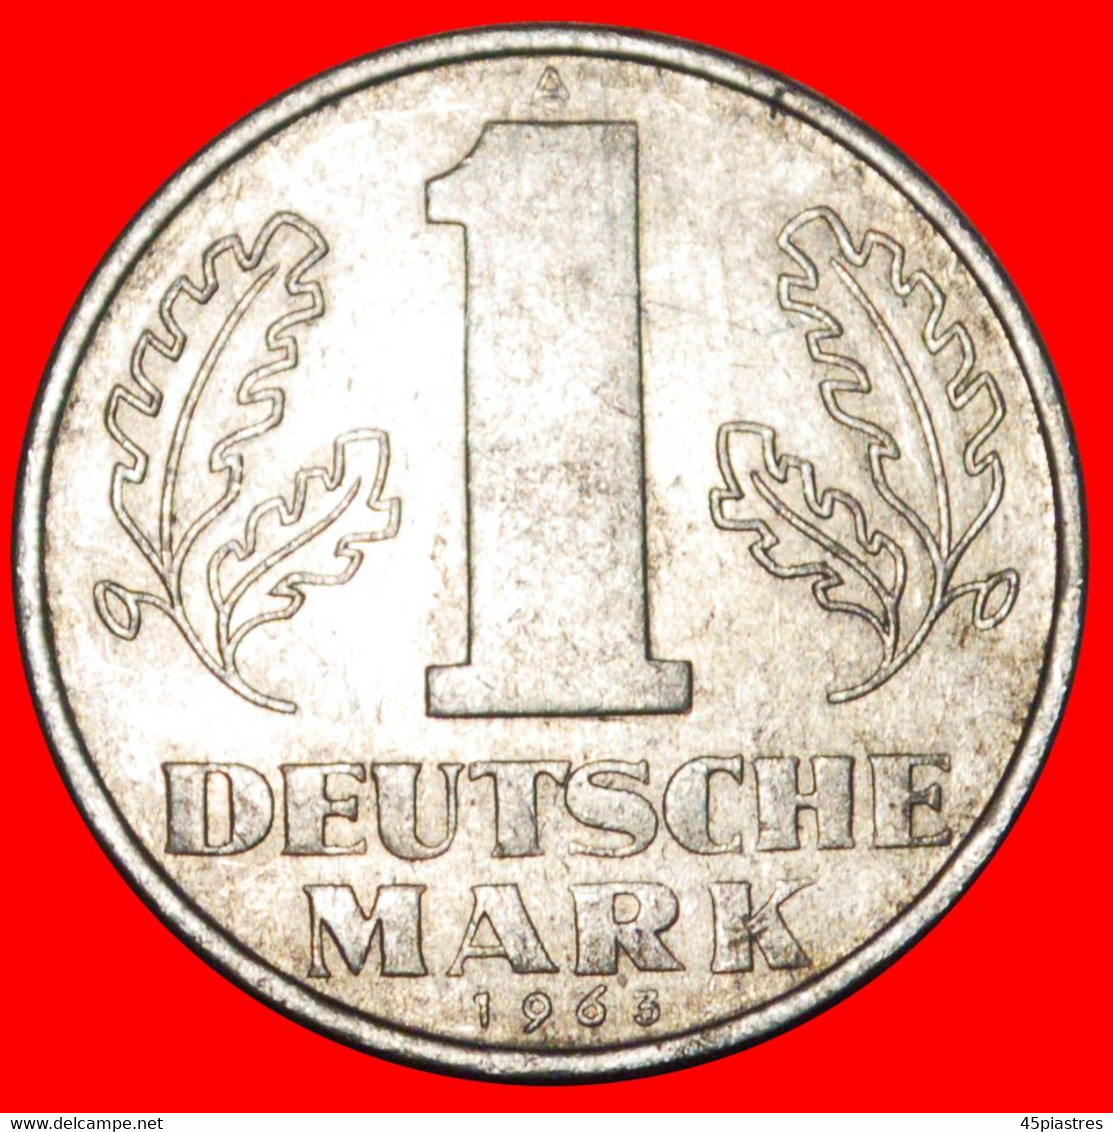 * DEUTSCHE MARK (1956-1963)★ GERMANY ★ 1 MARK 1963A! DISCOVERY COIN! LOW START ★ NO RESERVE! - 1 Marco